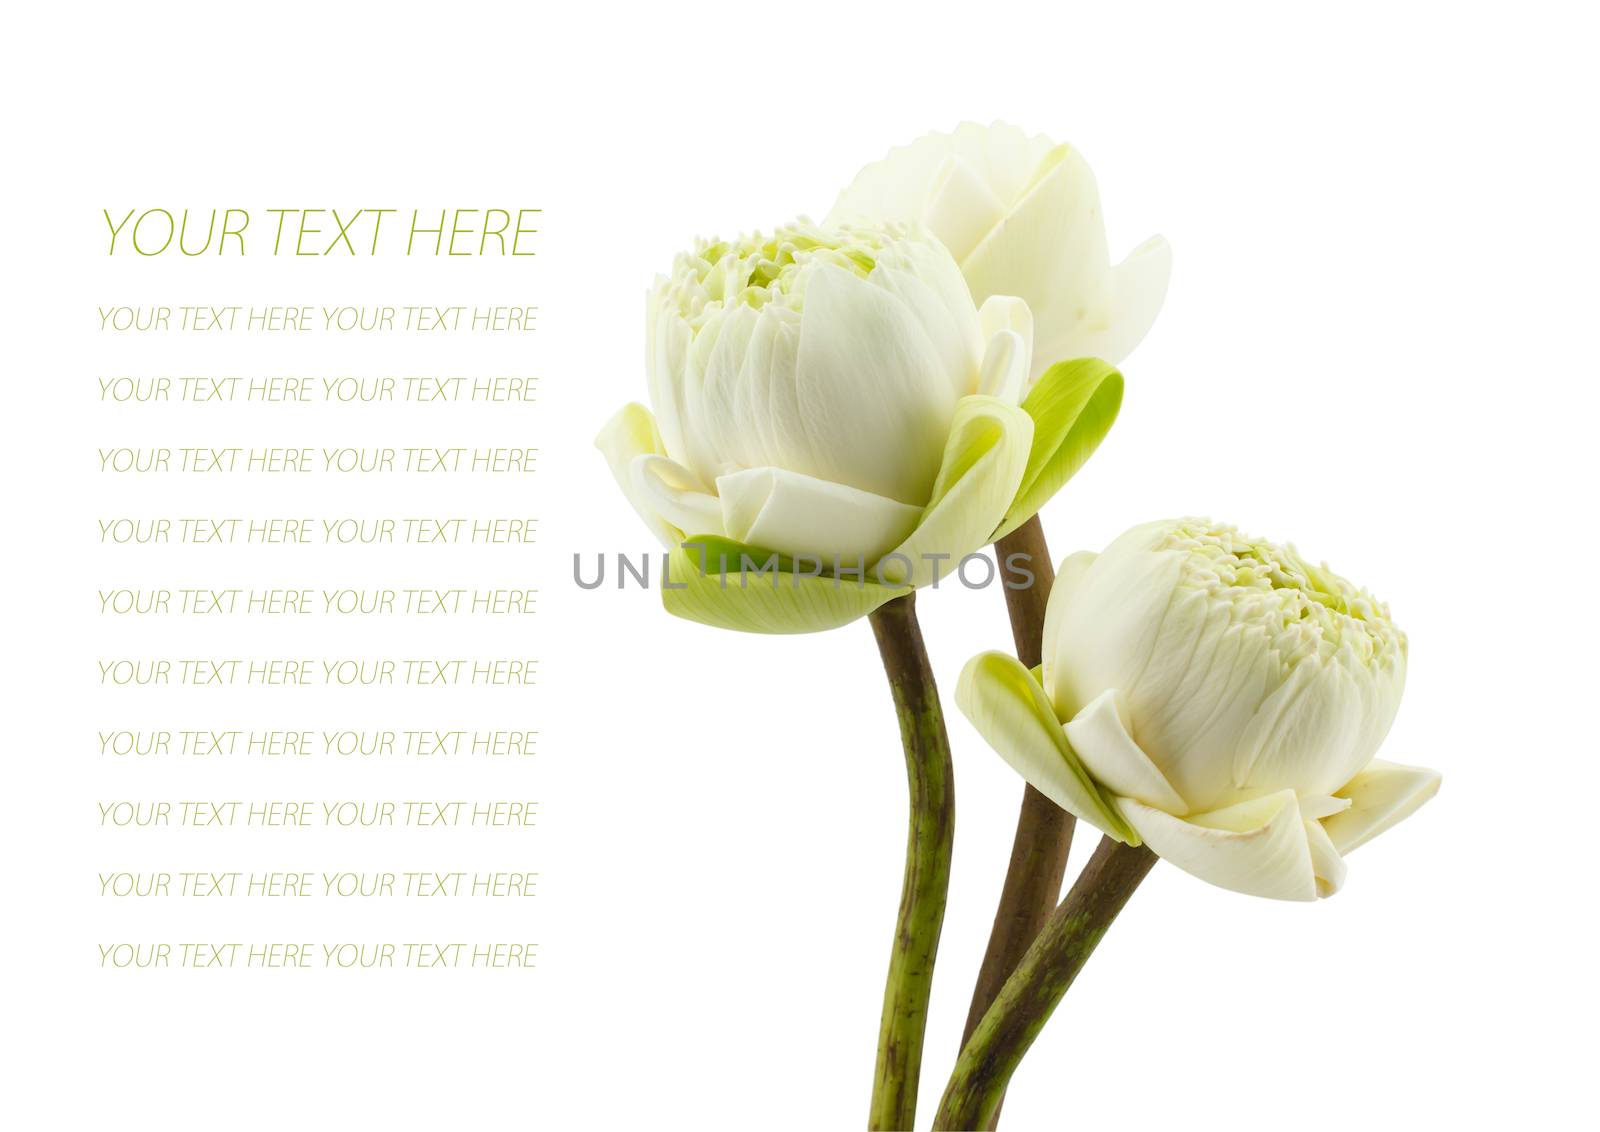  green three lotus flowers  blossom isolated on white background by vitawin